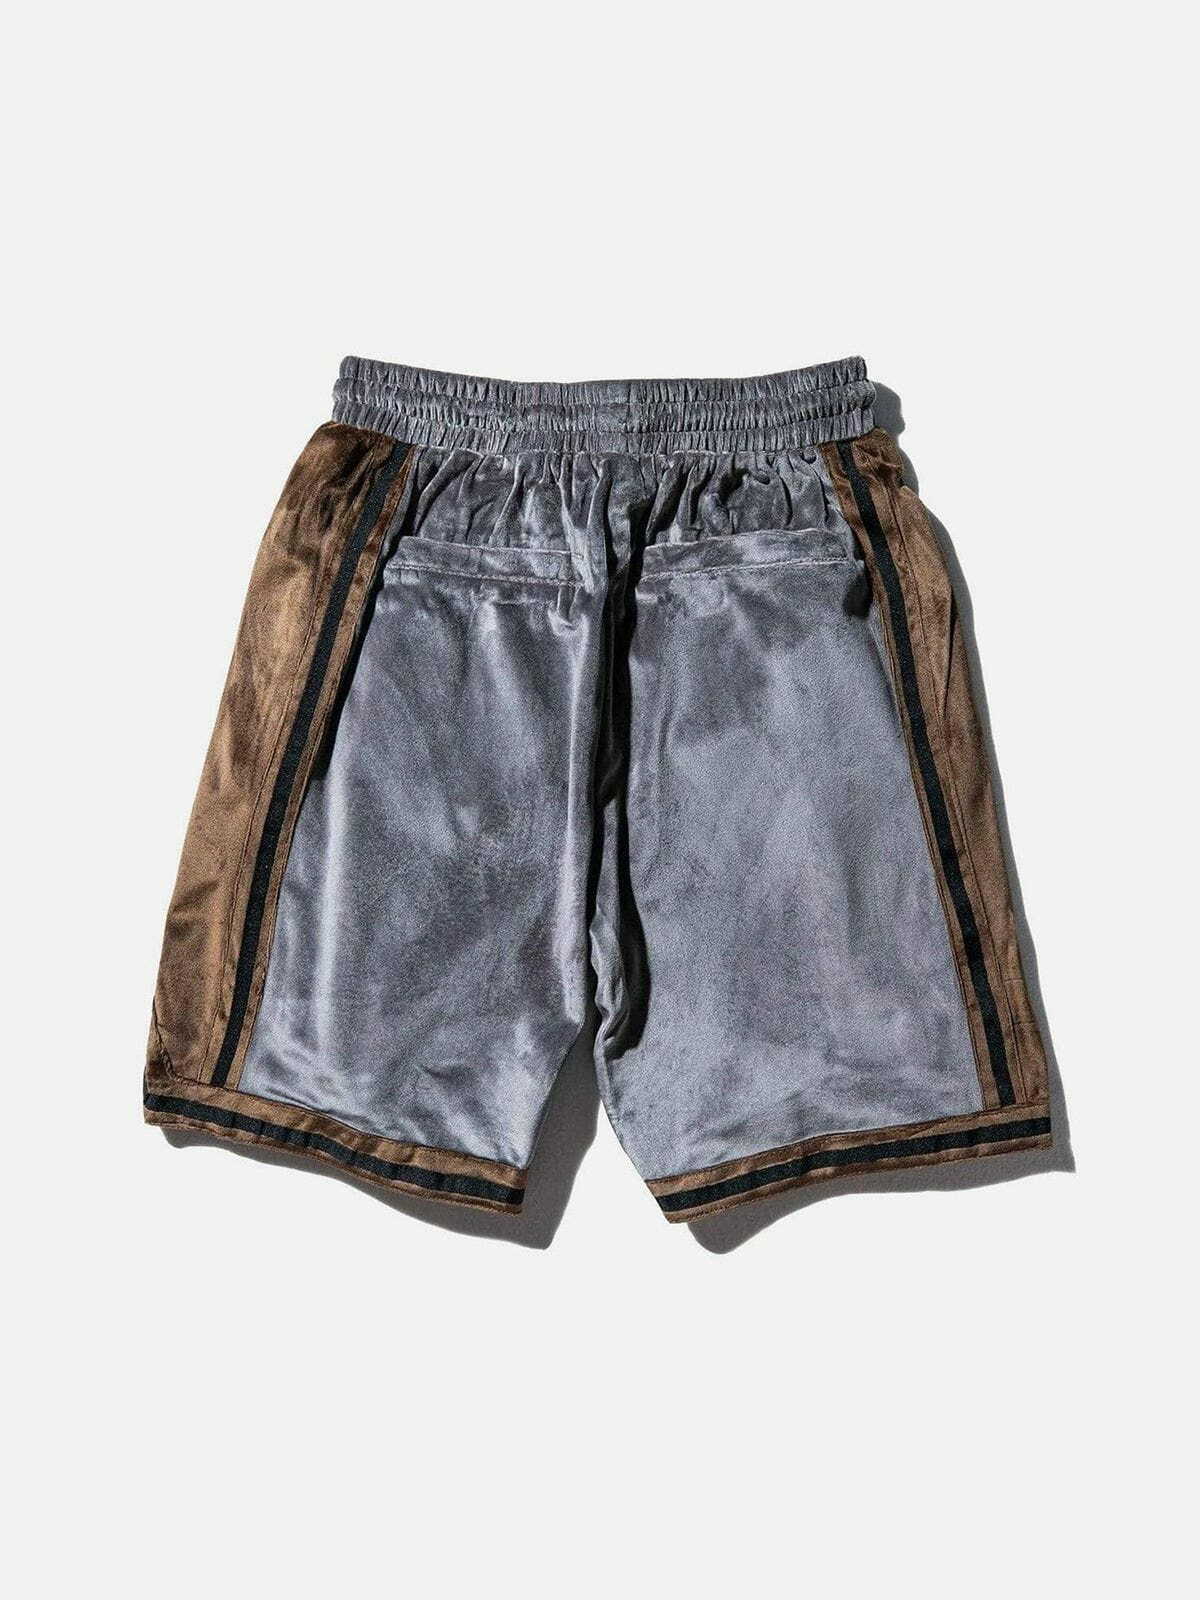 retroinspired suede shorts edgy  vibrant streetwear essential 8588